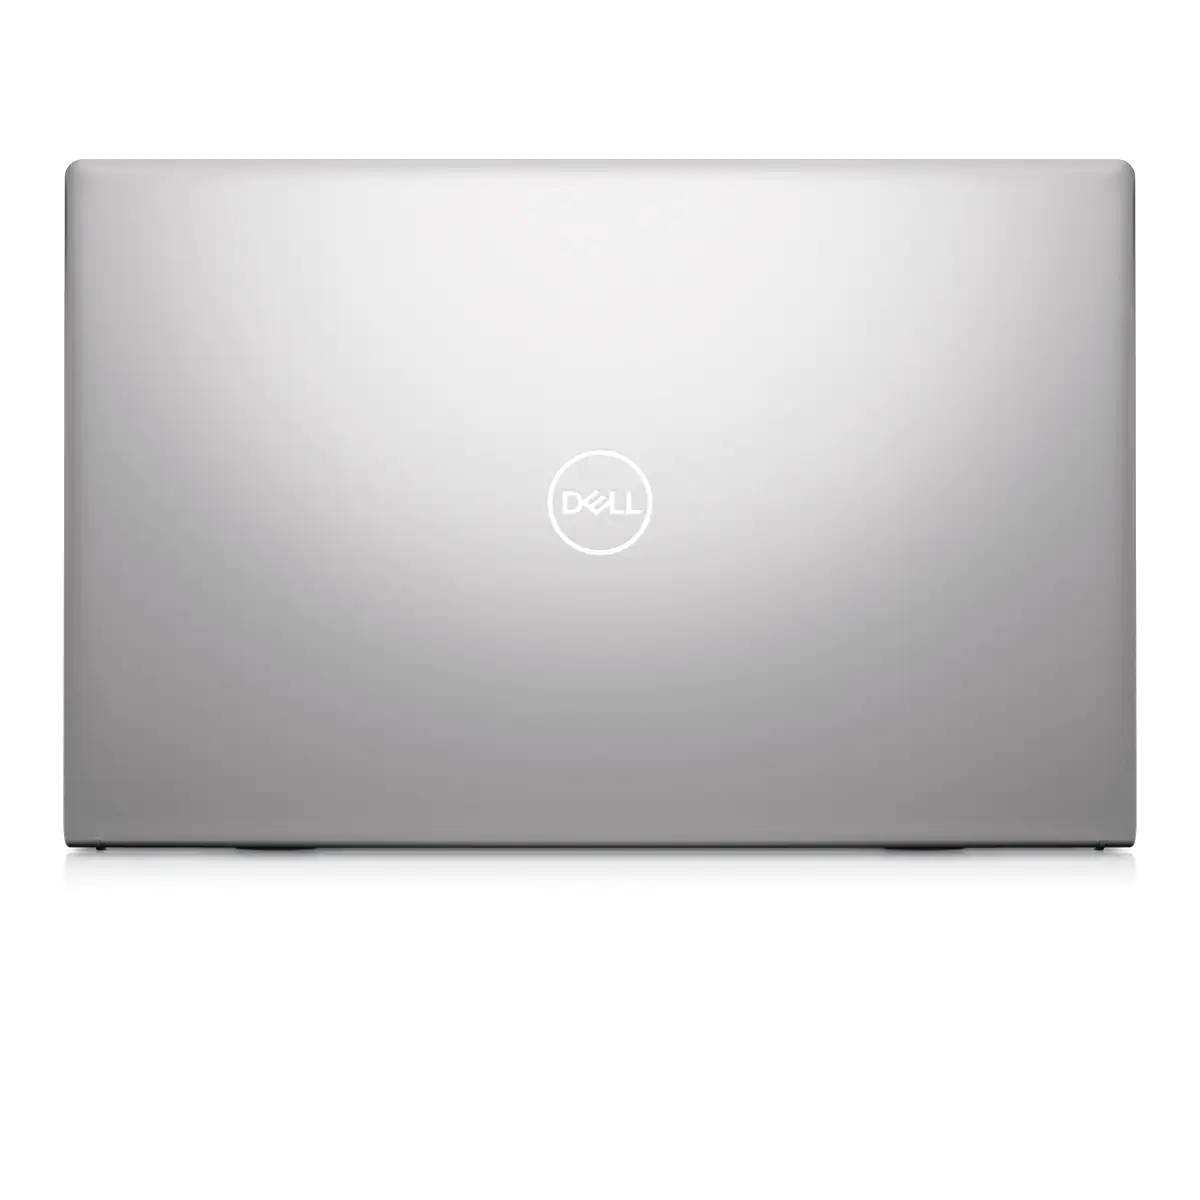 New Inspiron 5510 Laptop11th Gen i5/8GB/512GB SSD/Int Xe Gfx/FHD/Ms Office/ Silver (with bag) - Bharti Computer